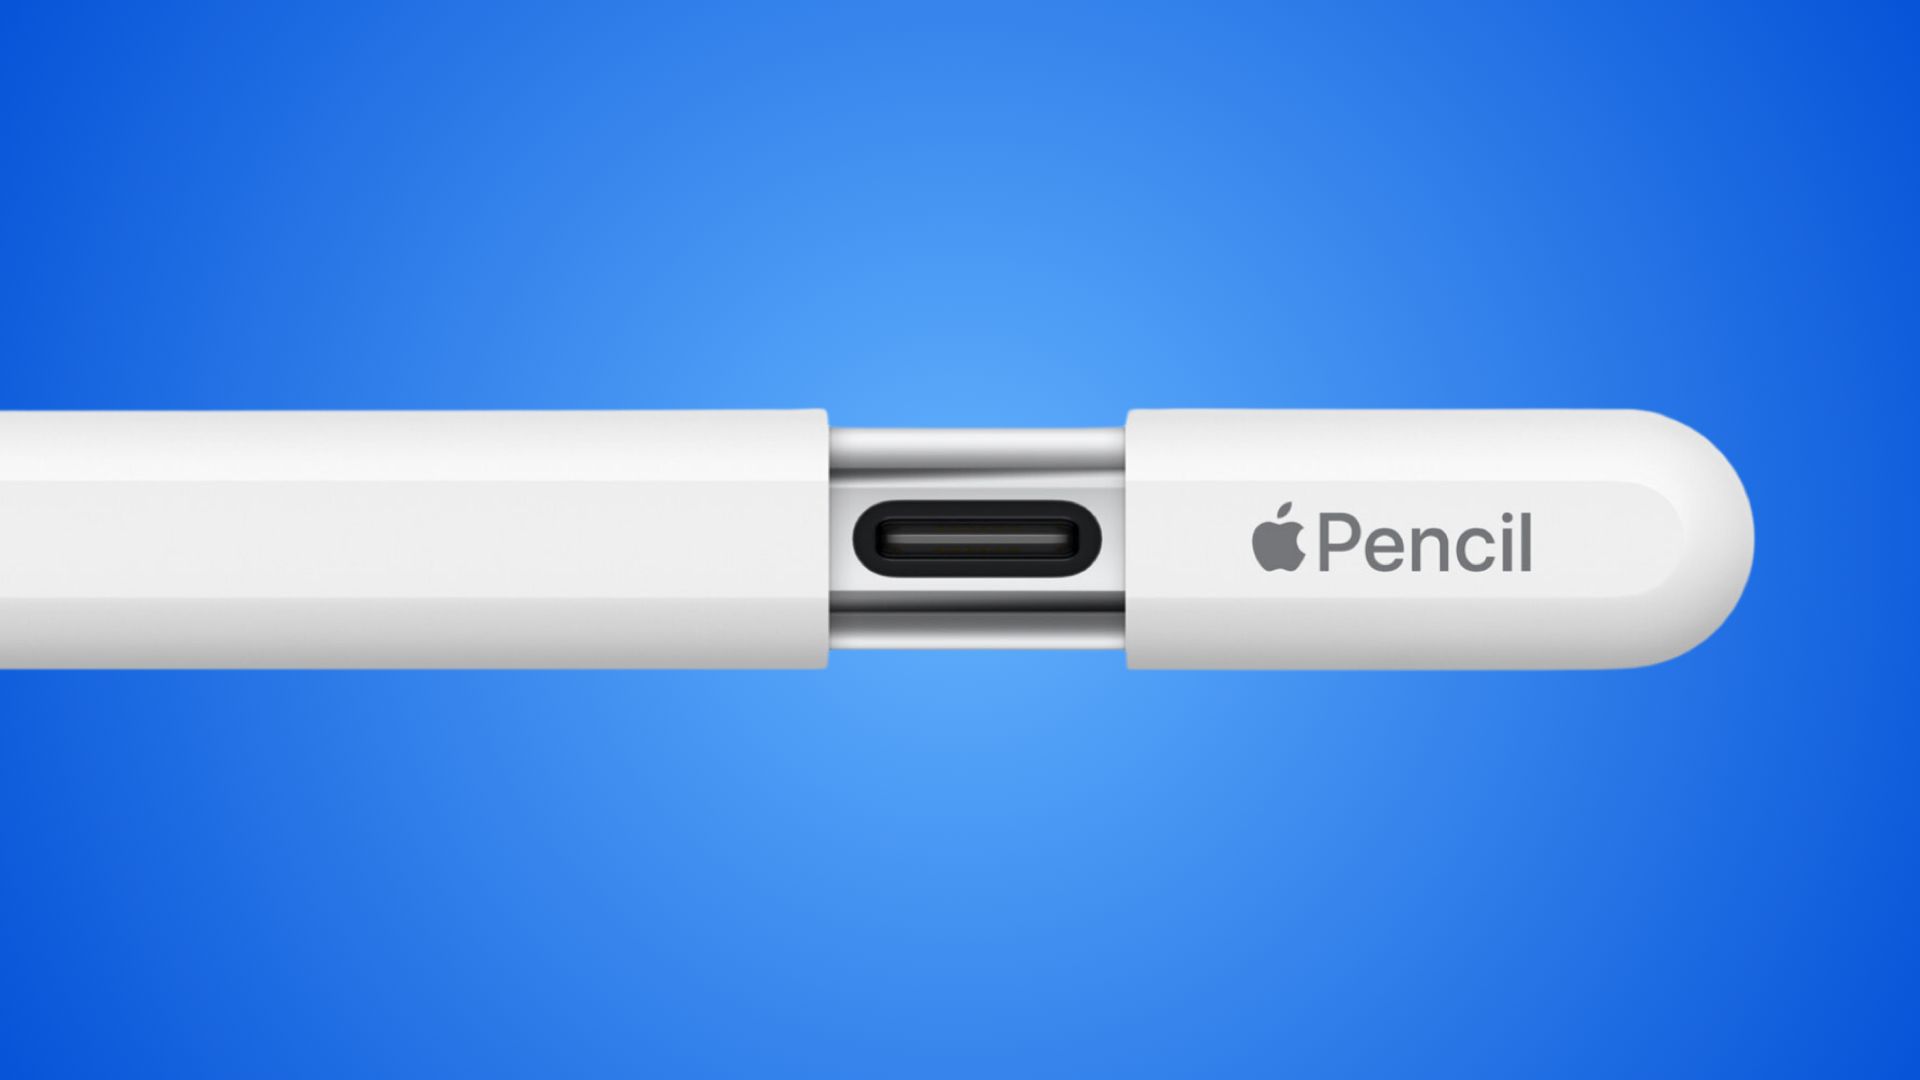 The new Apple Pencil features USB-C, a lower price tag, and wider